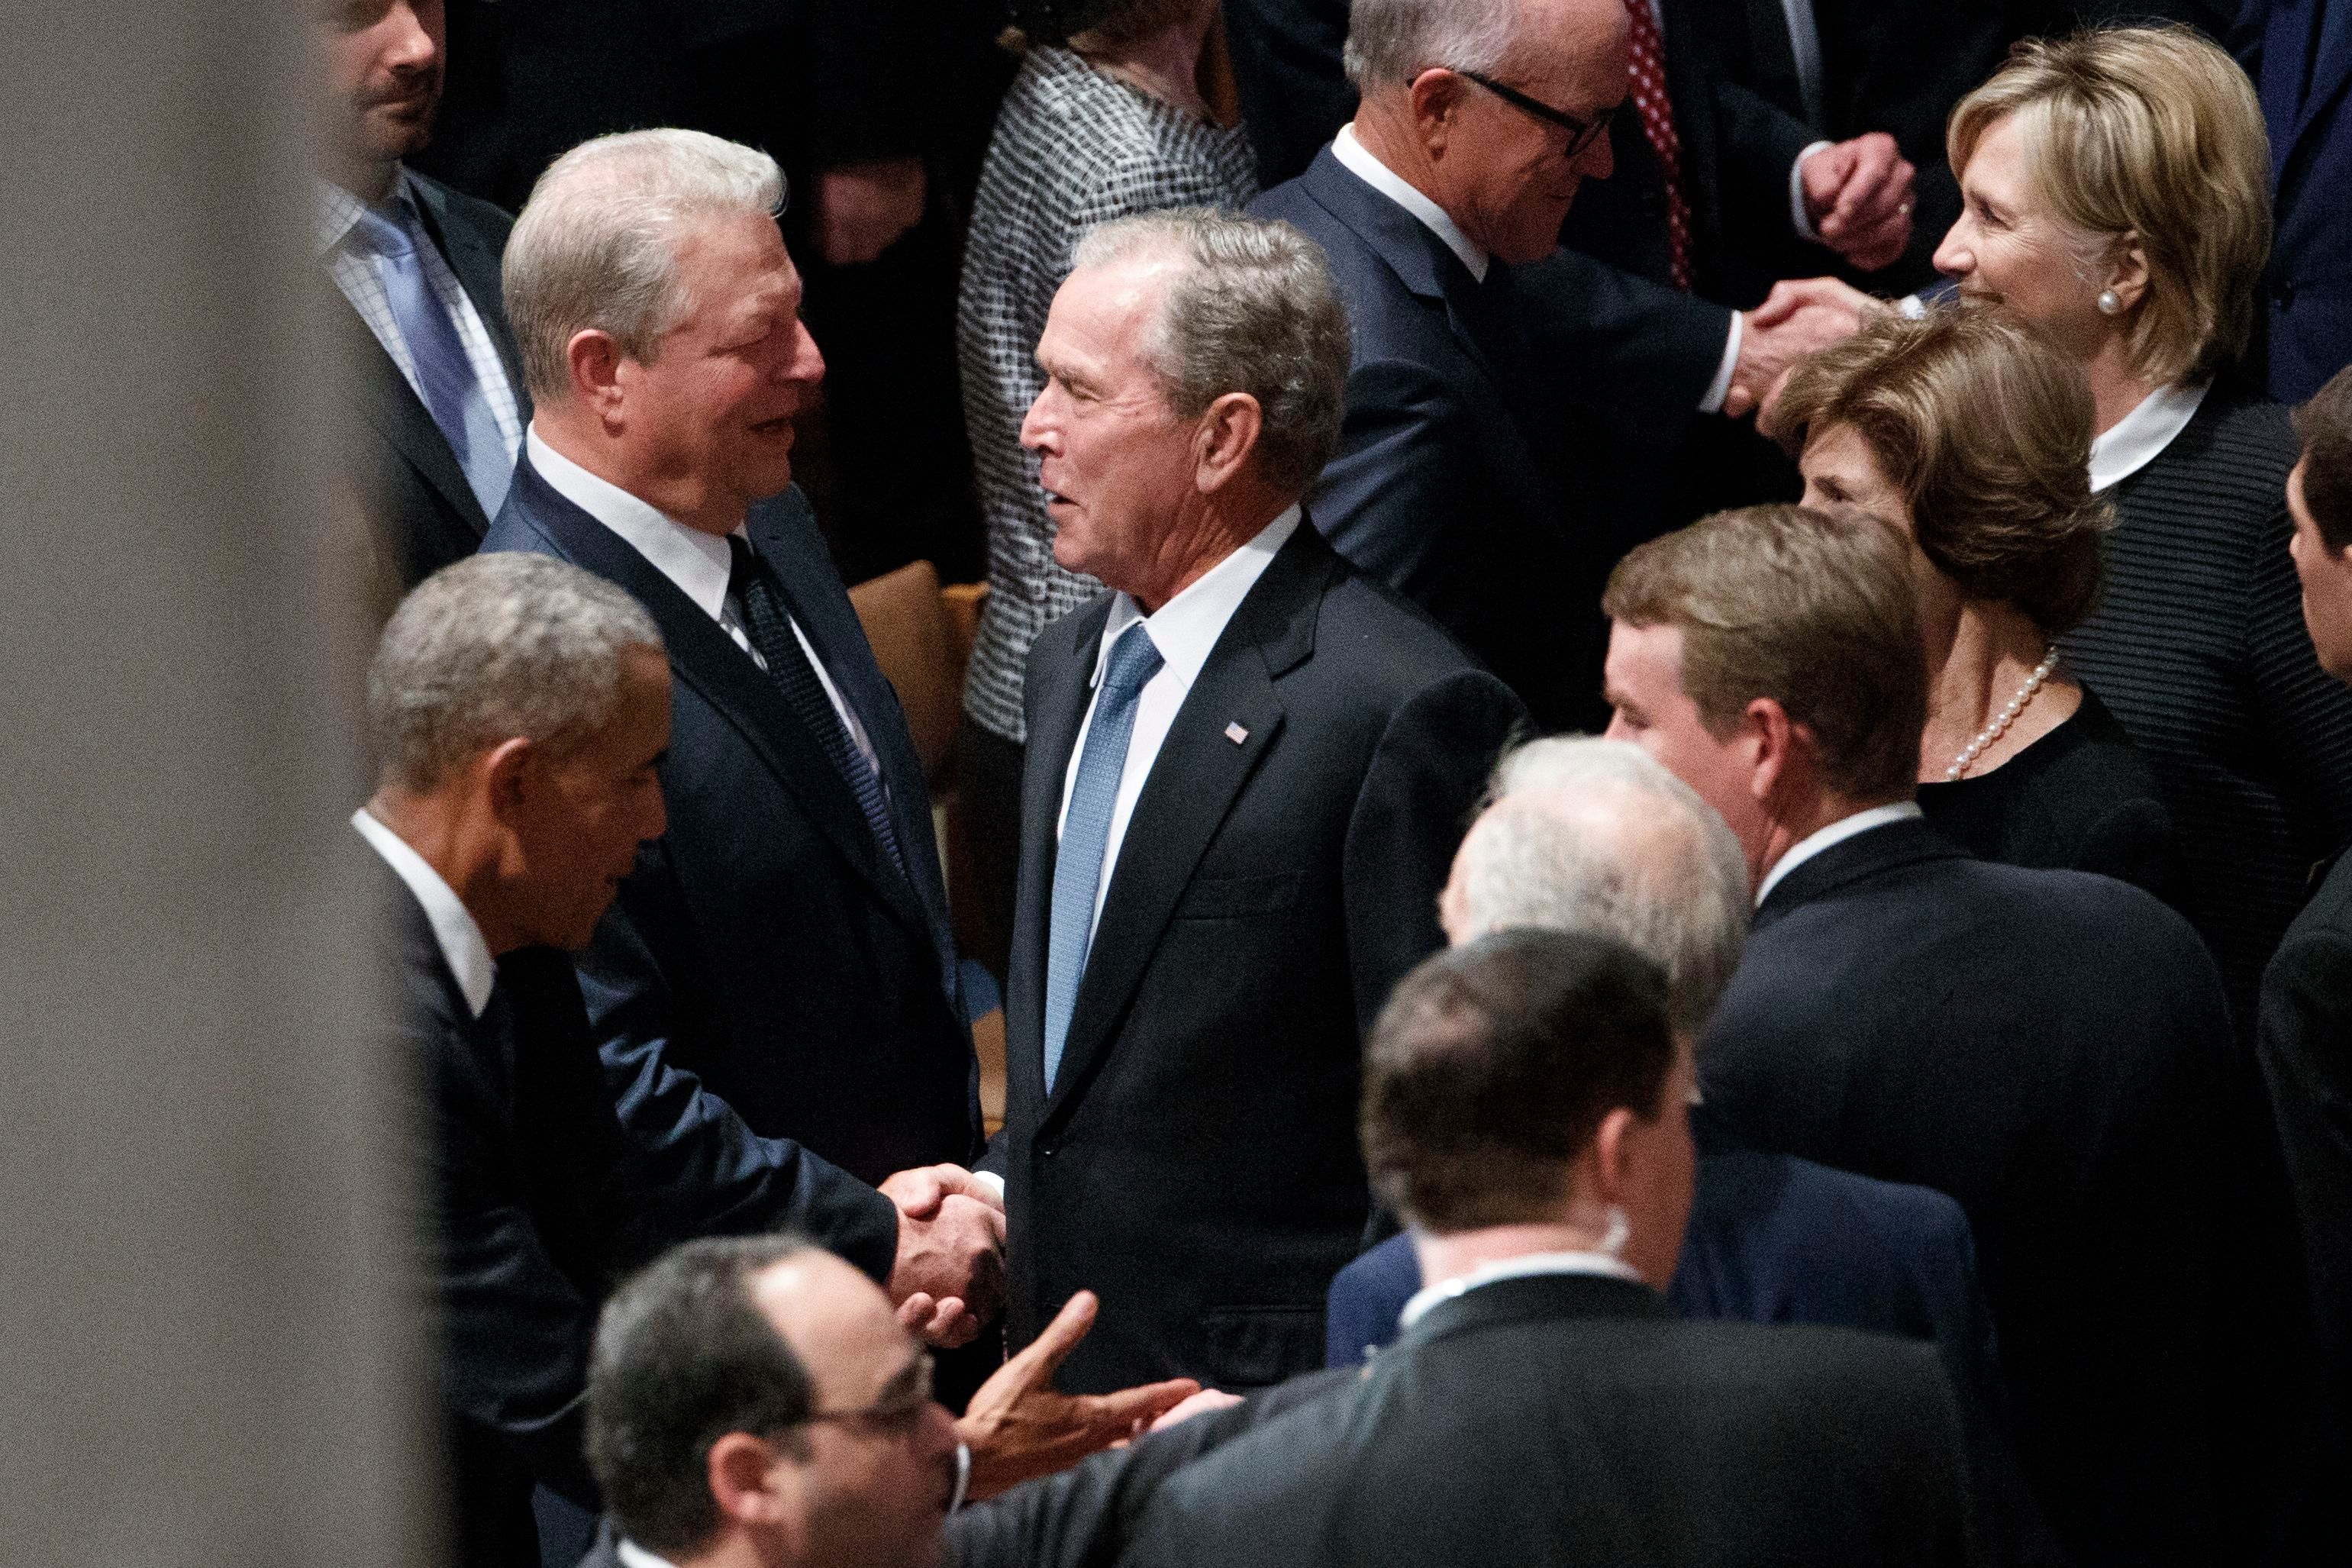 Former US President George W. Bush and former Vice President Al Gore – bitter political rivals – shake hands and John McCain's funeral at Washington National Cathedral Saturday, Sept. 1, 2018. (SHAWN THEW/EPA-EFE/REX/Shutterstock)